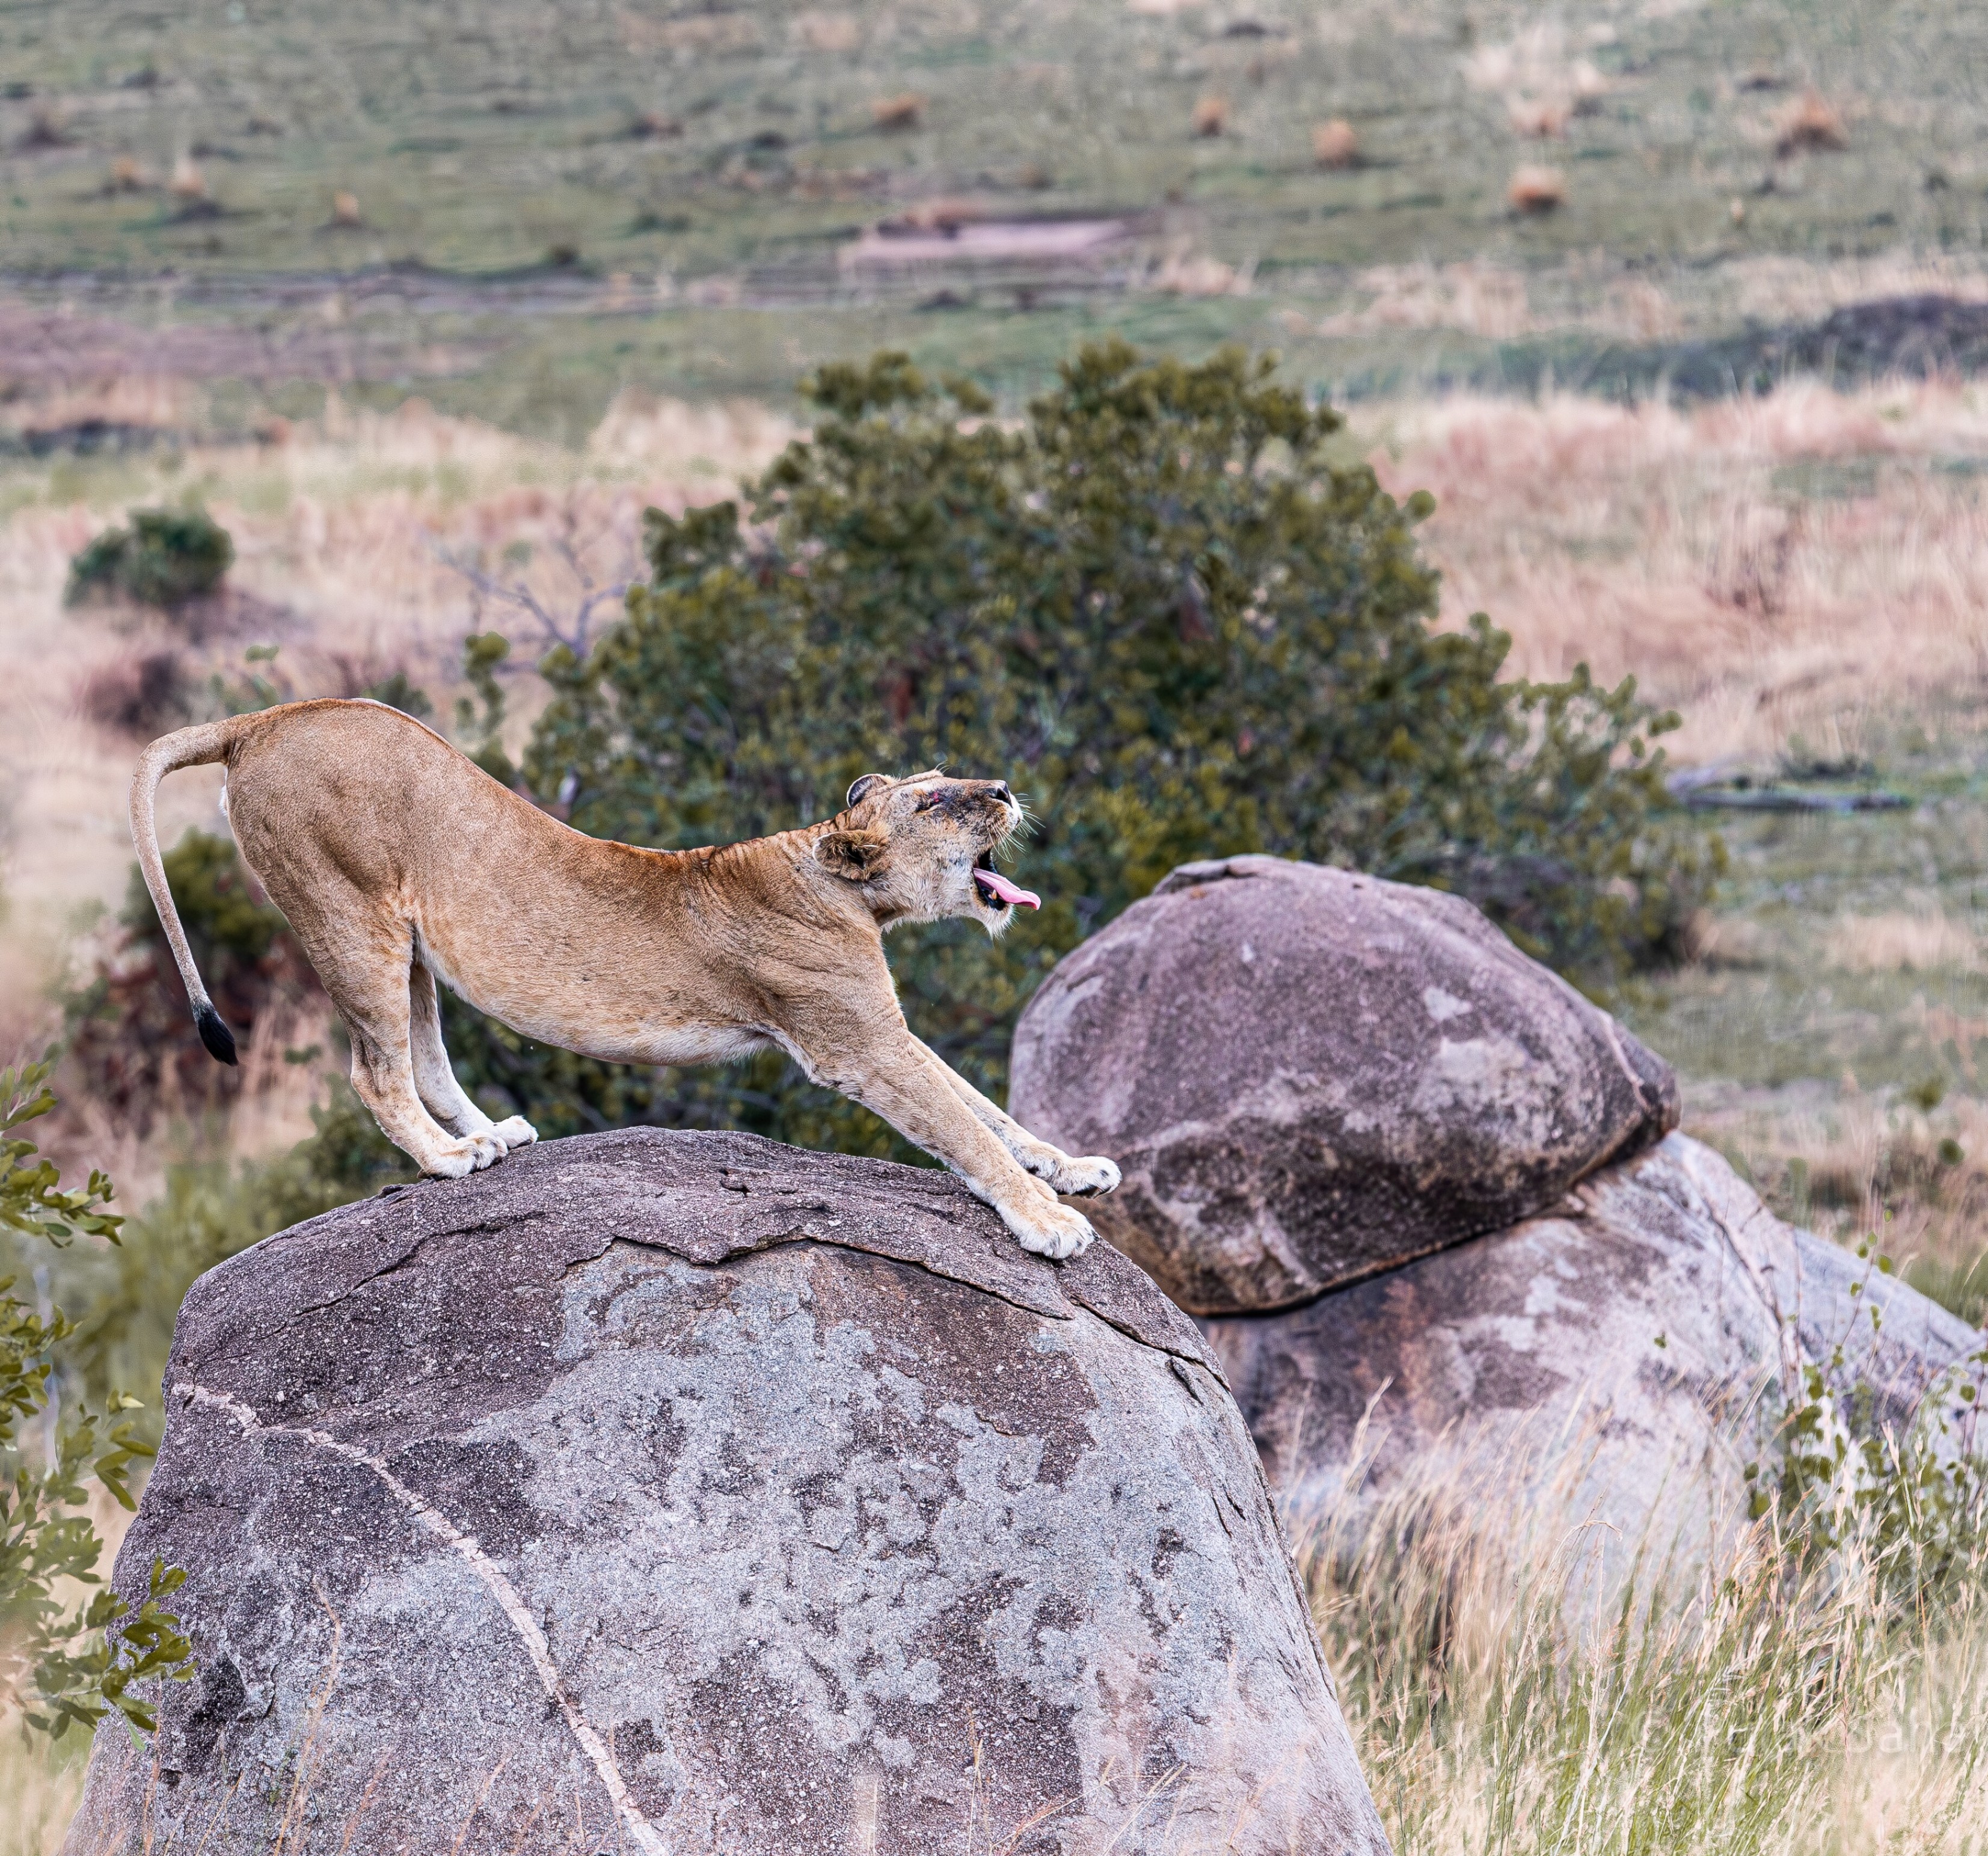 Lioness stretching on rock